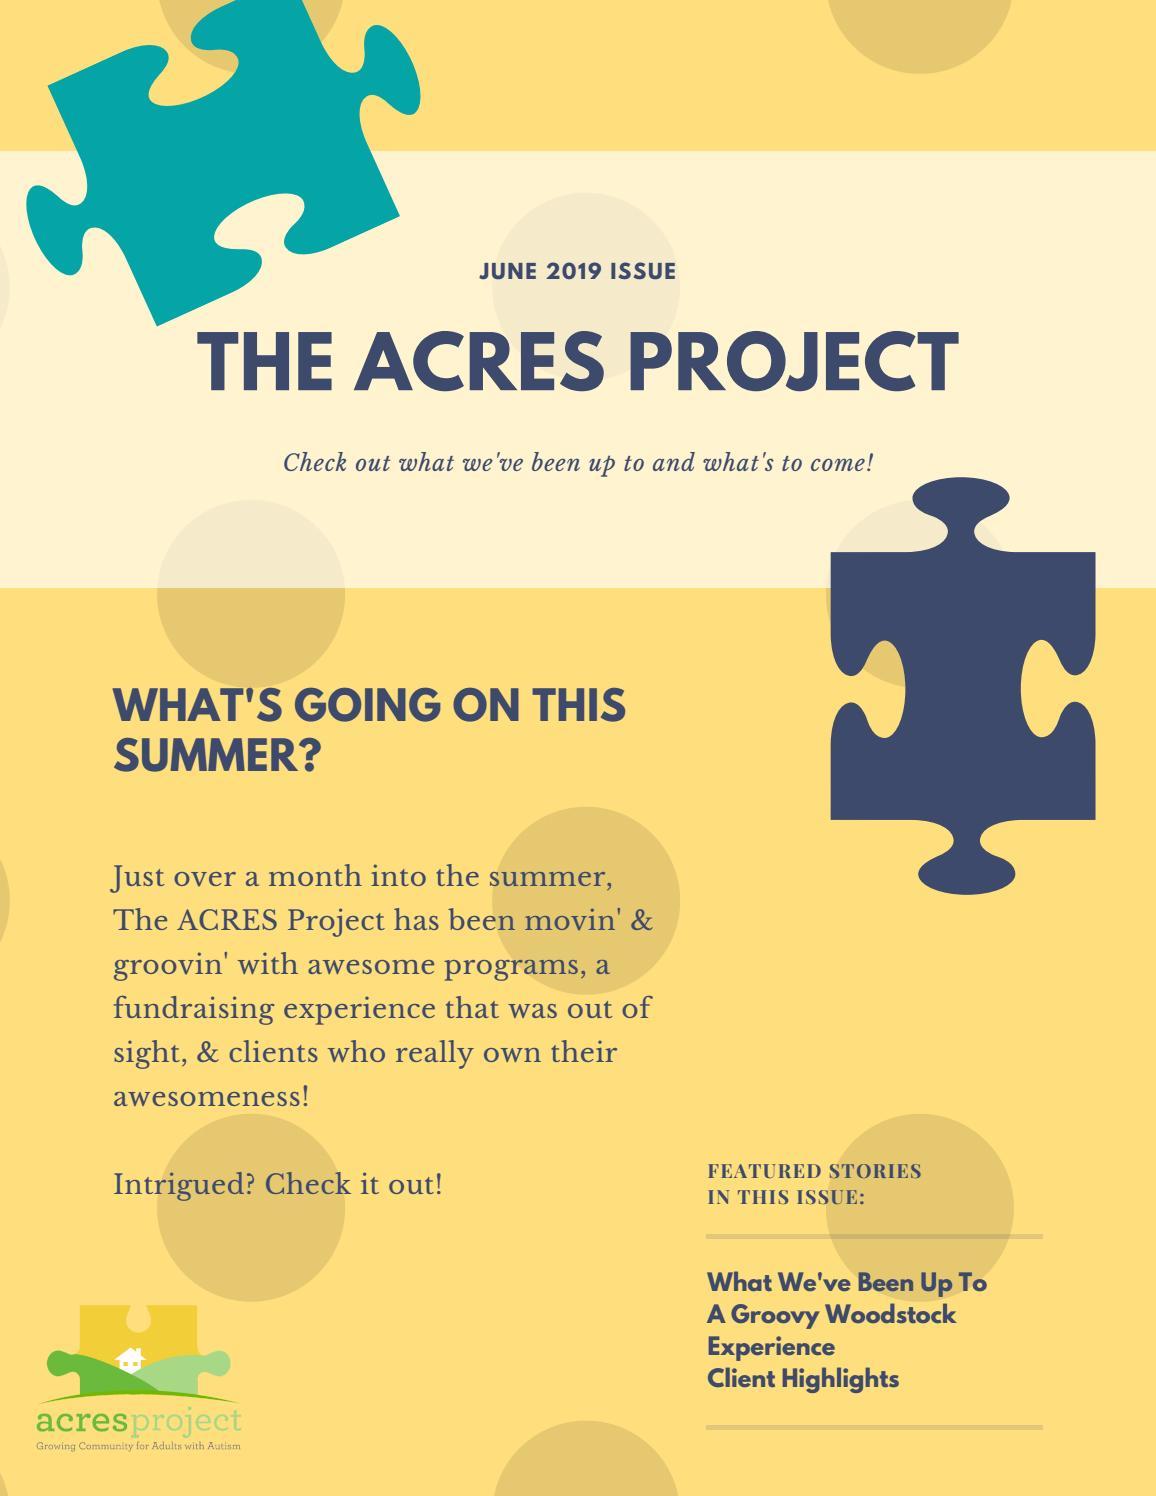 Our latest newsletter is live! Check out what ACRES has been up to this summer, and what's to come!